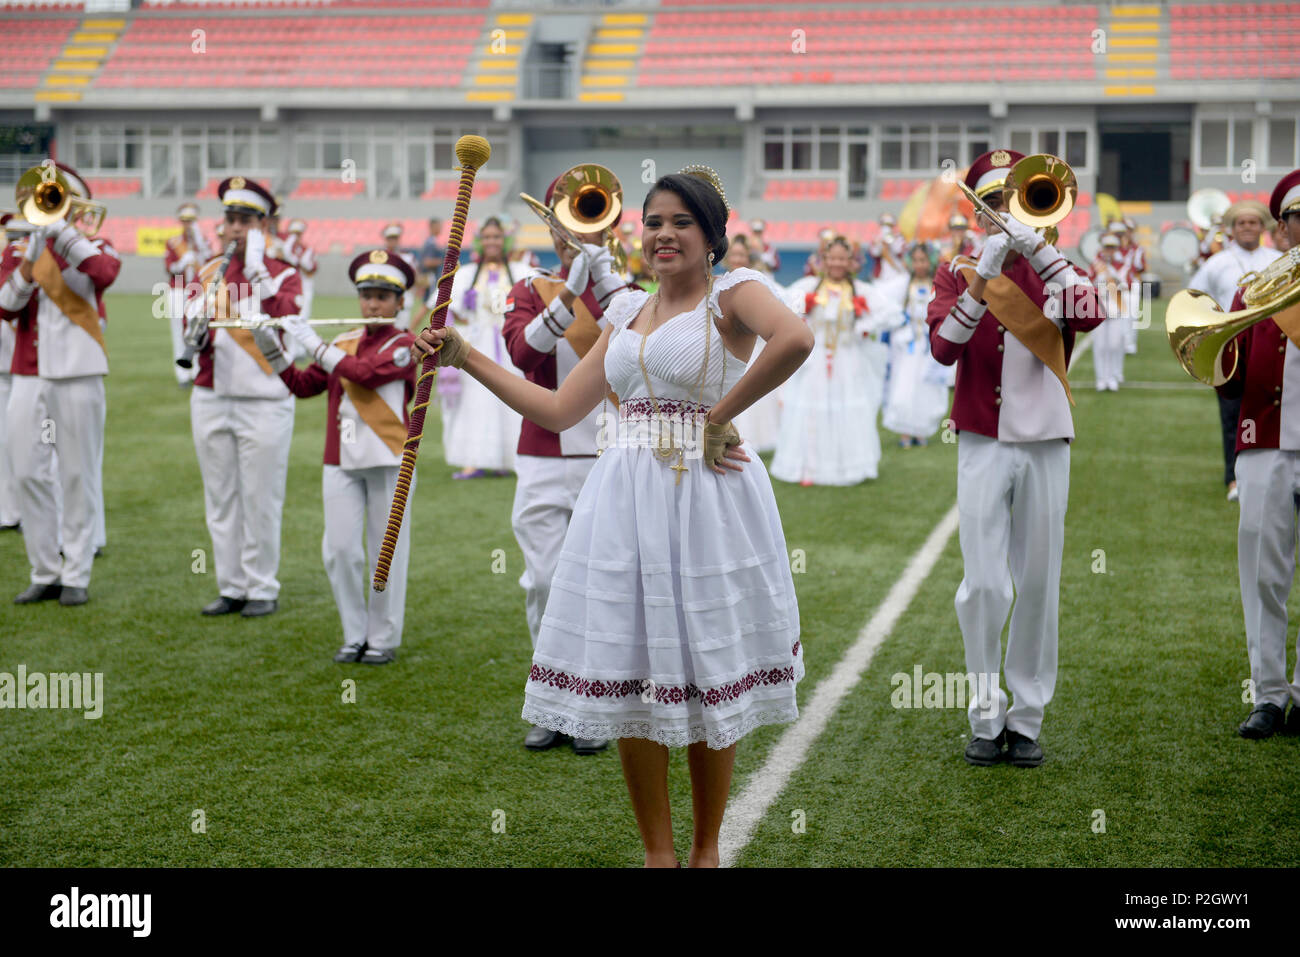 PANAMA CITY, Panama (Sept. 20, 2016) - The Colegio Moises Castillo High School marching band performs during a day of sports at the Estadio Maracaná de Panamá soccer stadium. UNITAS, Latin for 'unity,' is an annual multinational exercise designed to enhance South American and U.S. naval and public security forces cooperation and improve joint maritime operations. (U.S. Navy Photo by Mass Communication Specialist 1st Class Jacob Sippel) Stock Photo